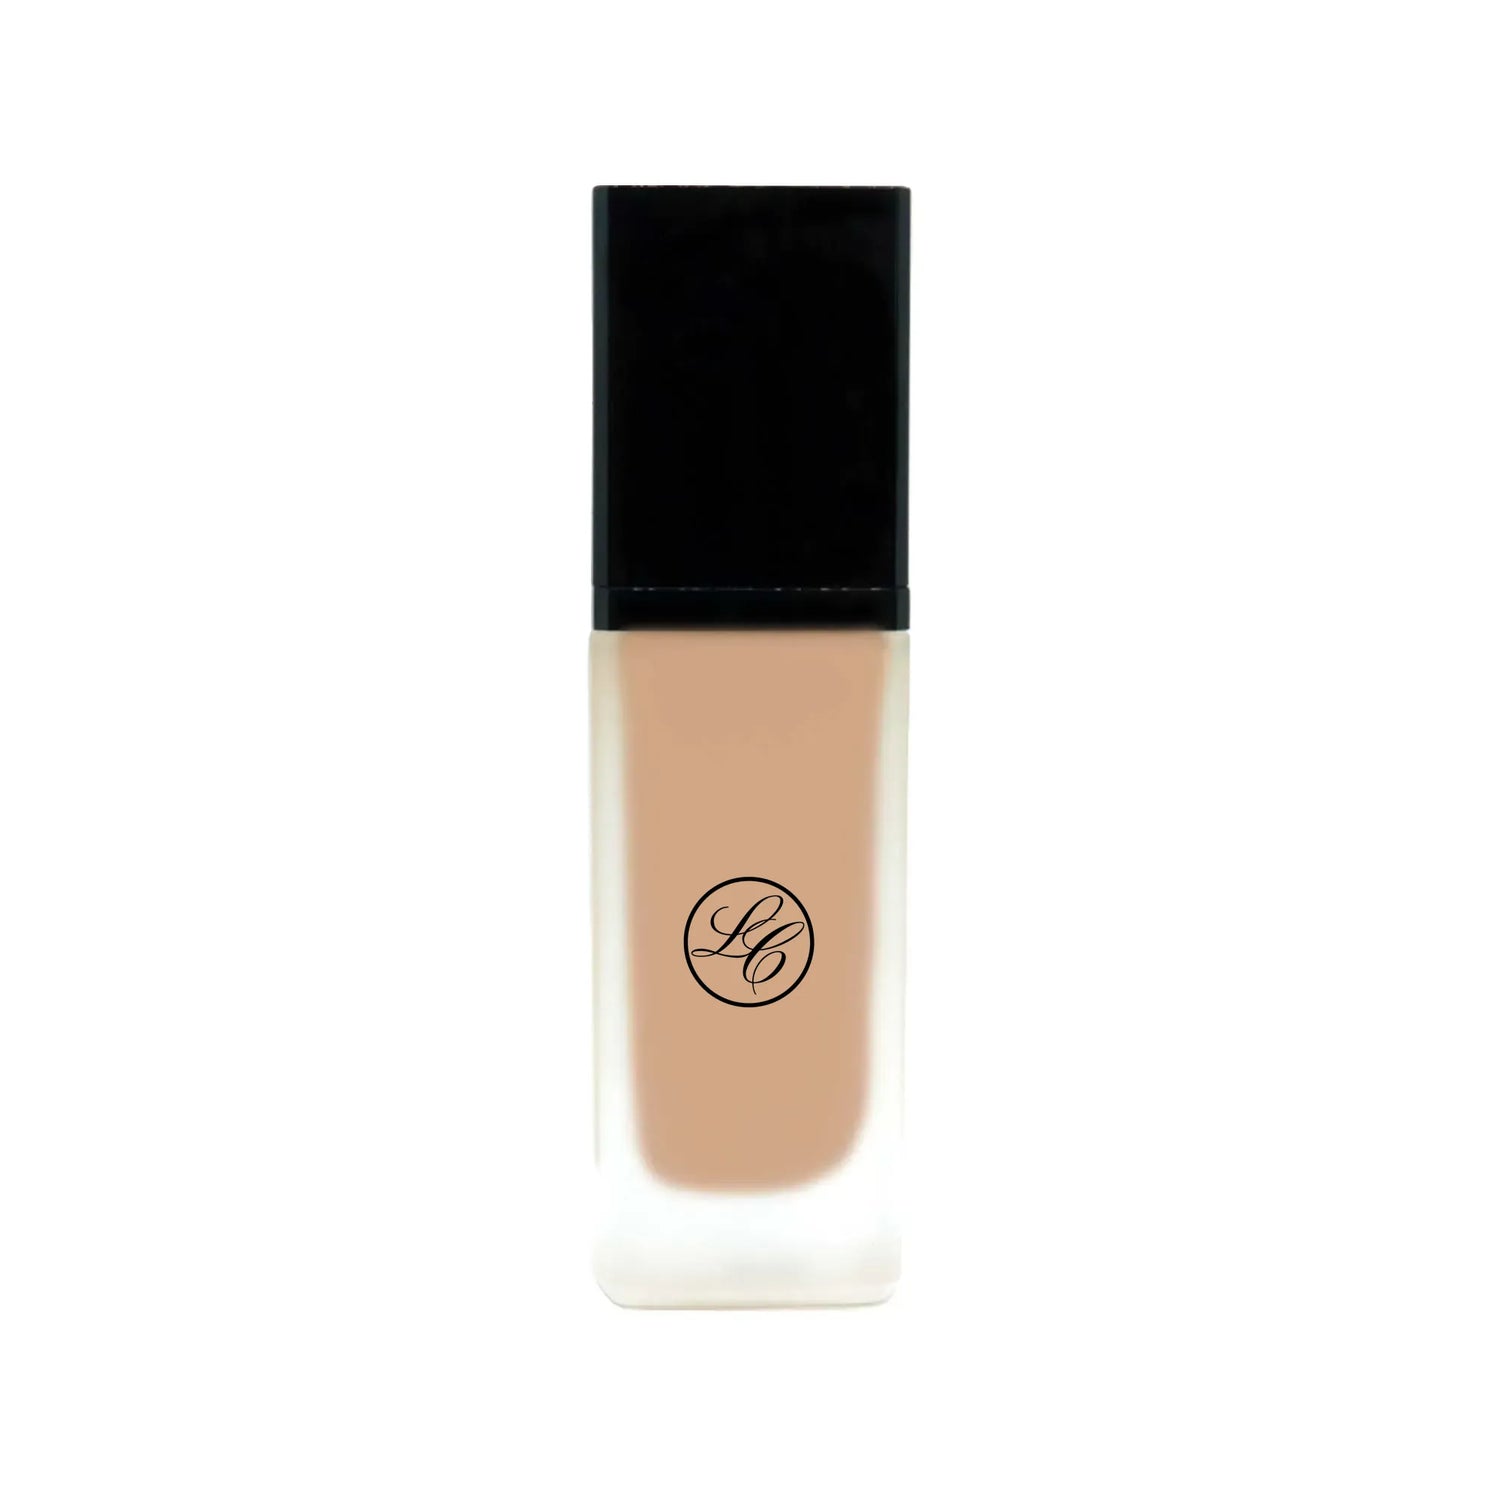 Foundation with SPF - Penny - Lunox Cosmetics